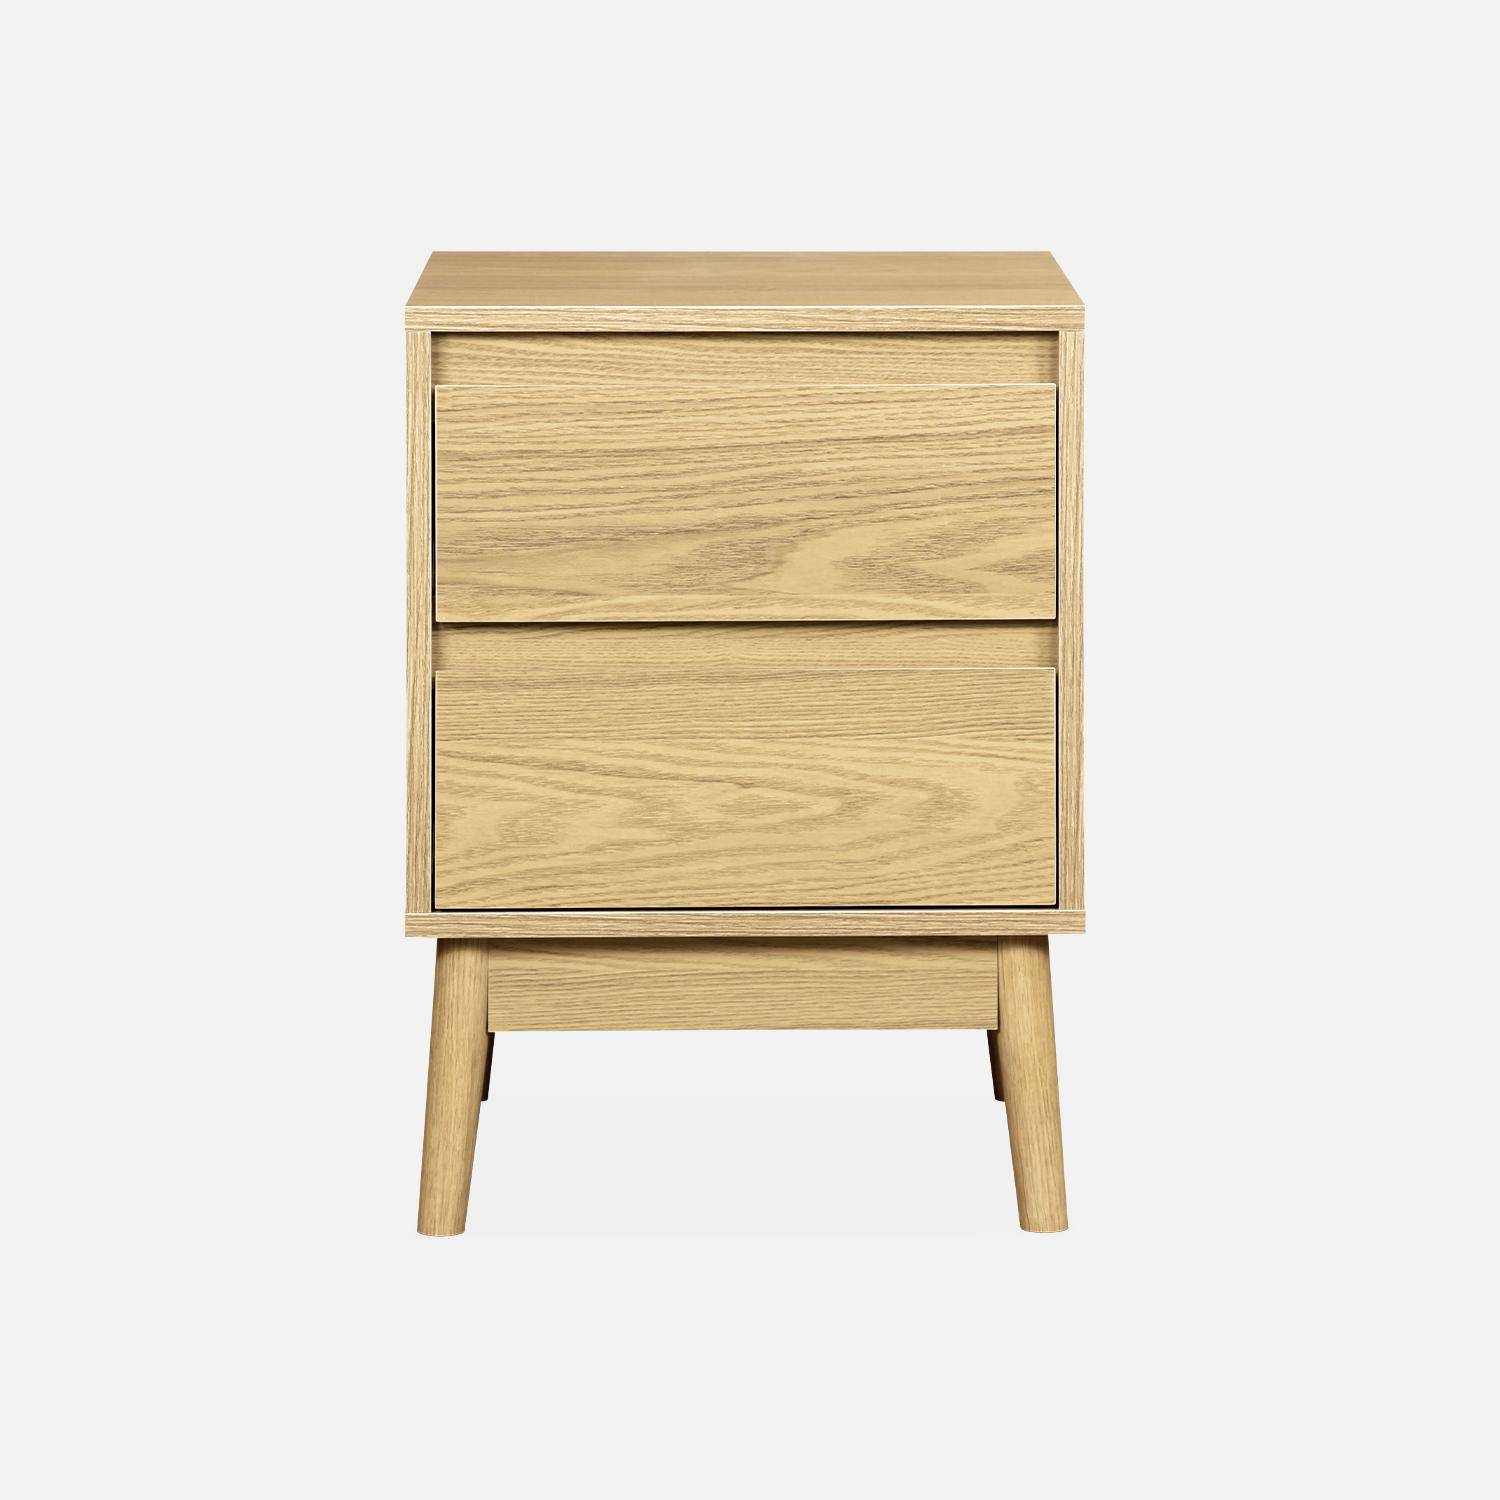 Wooden bedside table, two drawers - Dune Photo4